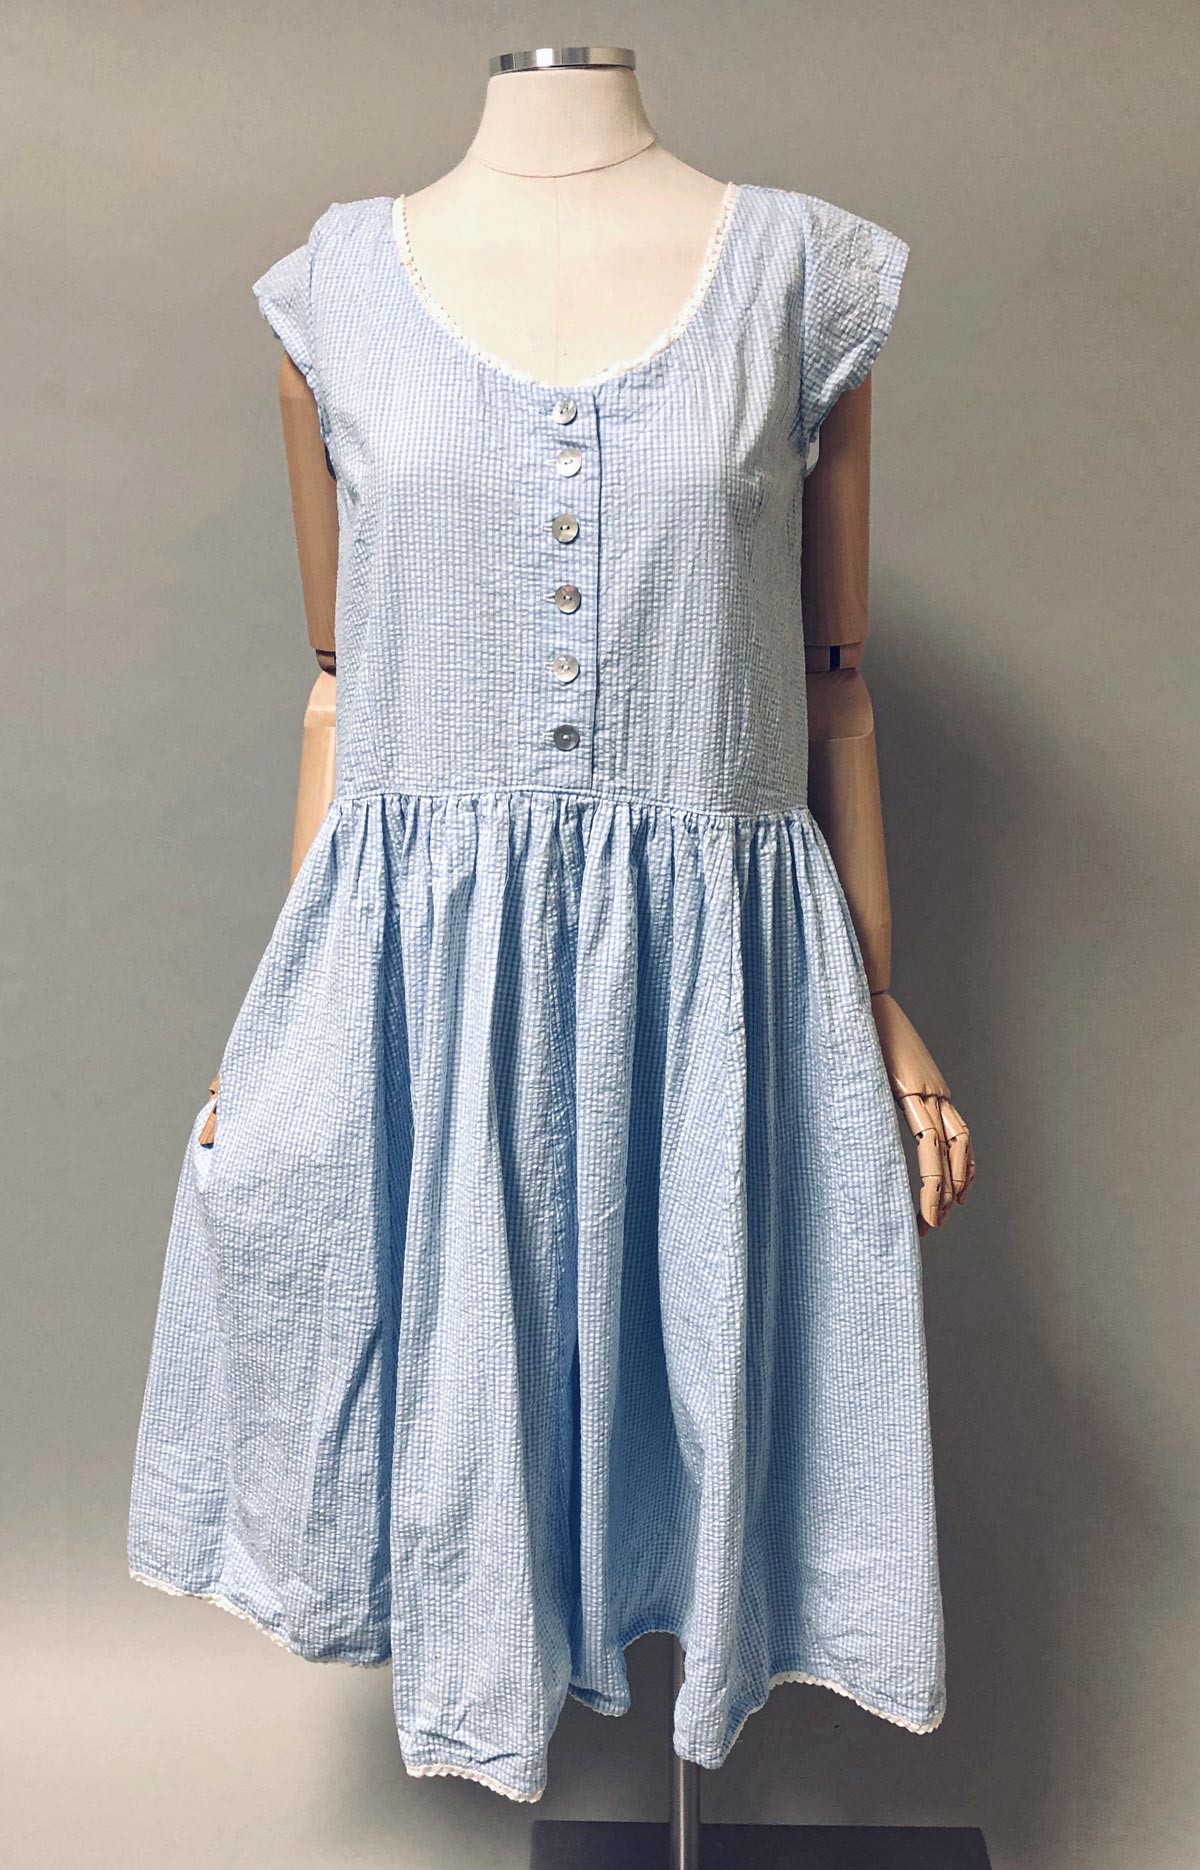 Vintage Style Dress in Seersucker and Cotton – Heart's Desire Clothing